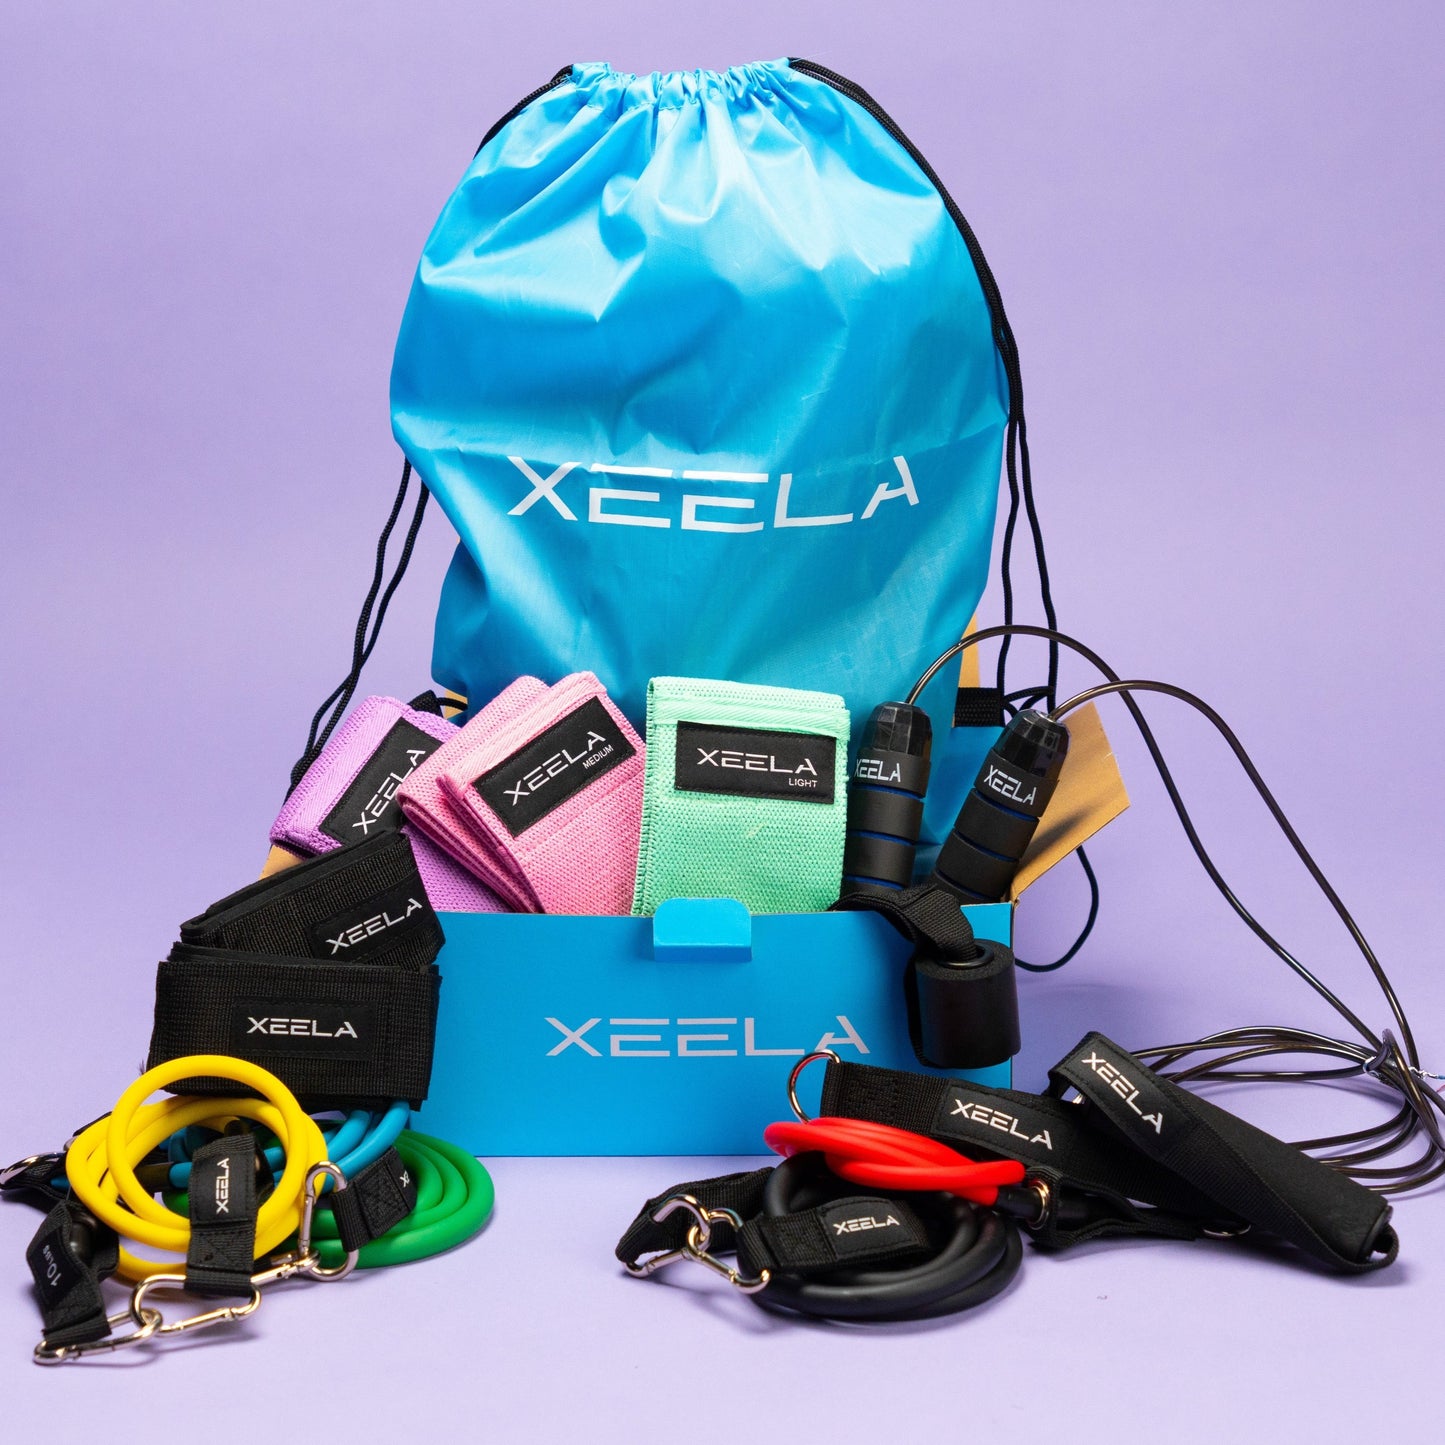 XEELA AT-HOME WORKOUT EQUIPMENT KIT